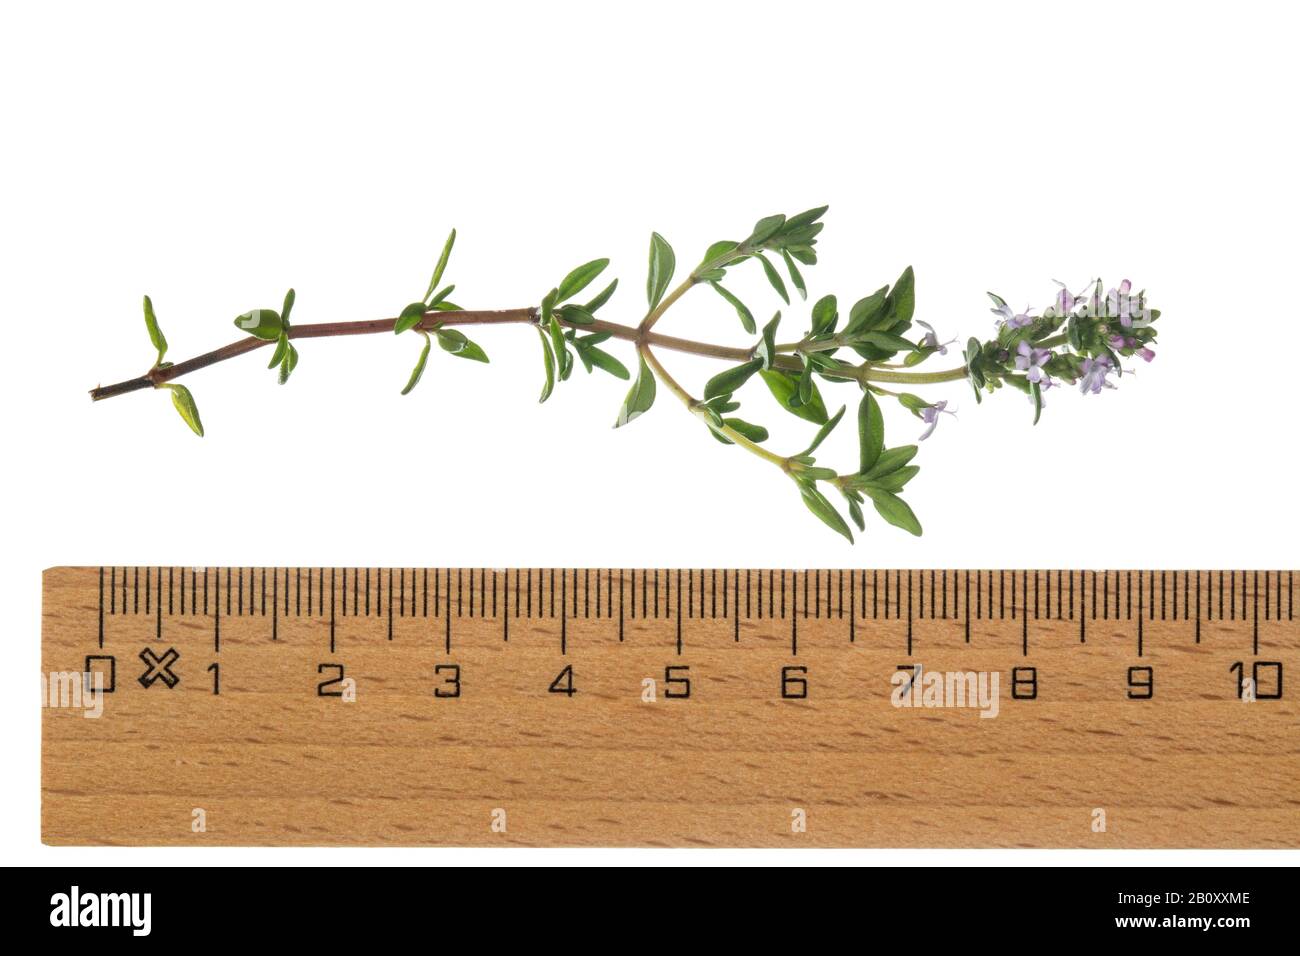 Garden thyme, English thyme, Common thyme (Thymus vulgaris), blooming branch, cutout with ruler Stock Photo